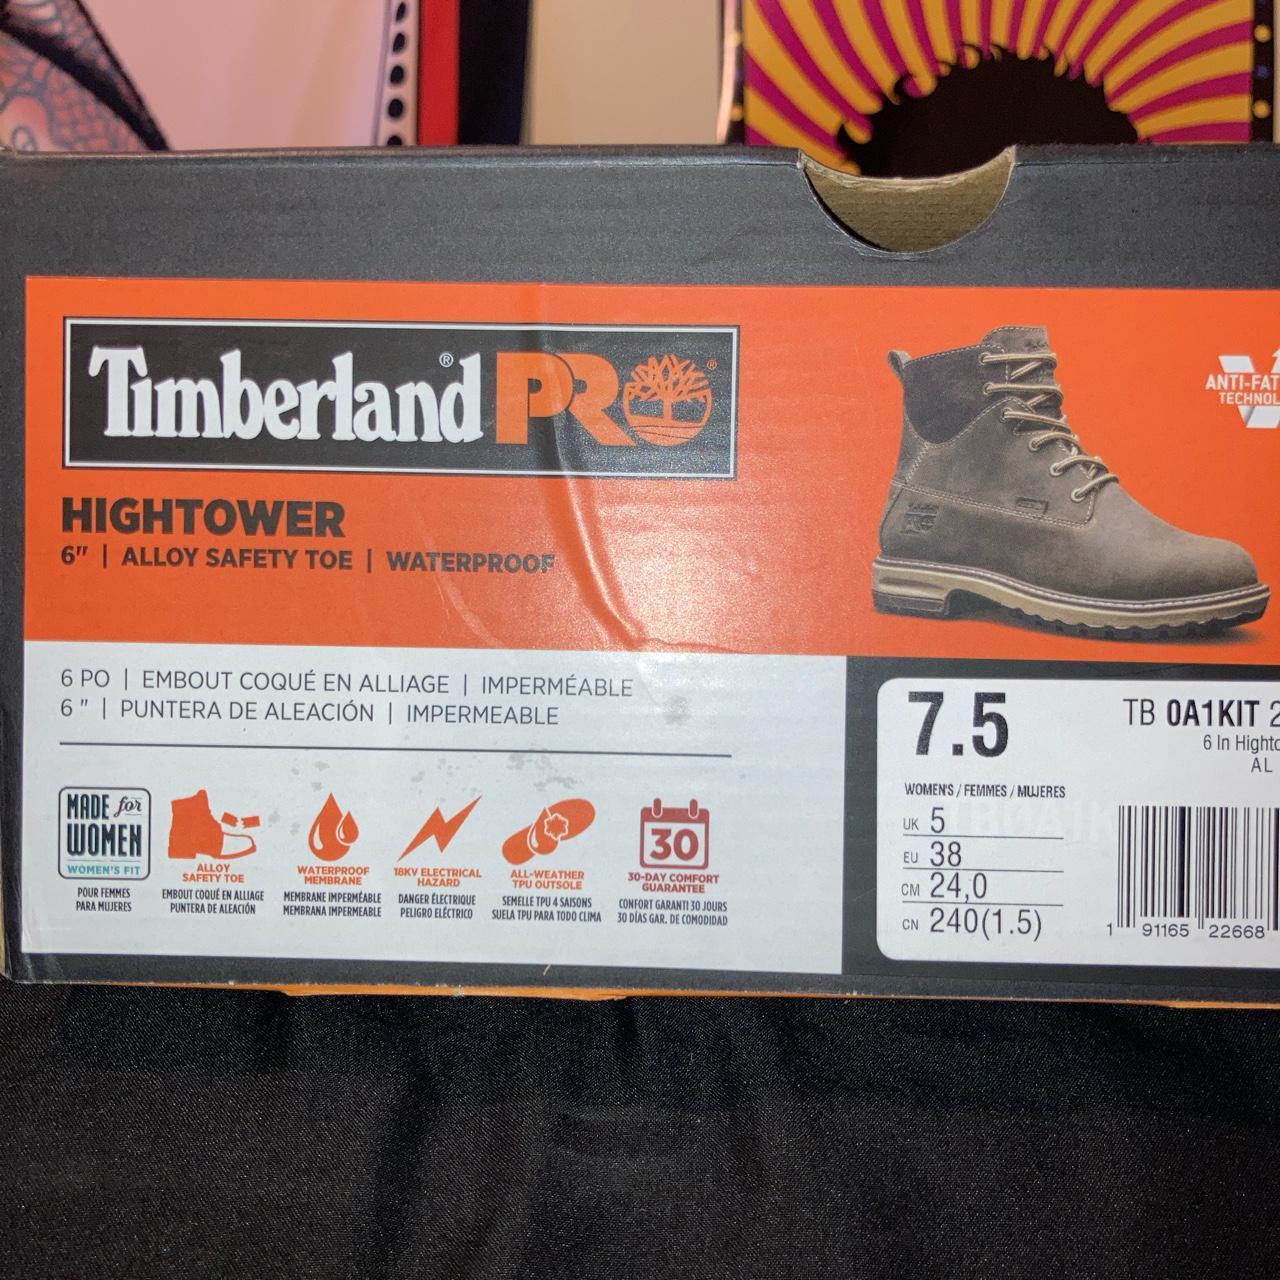 Product Image 2 - Hightower Timberland steel toe boots,